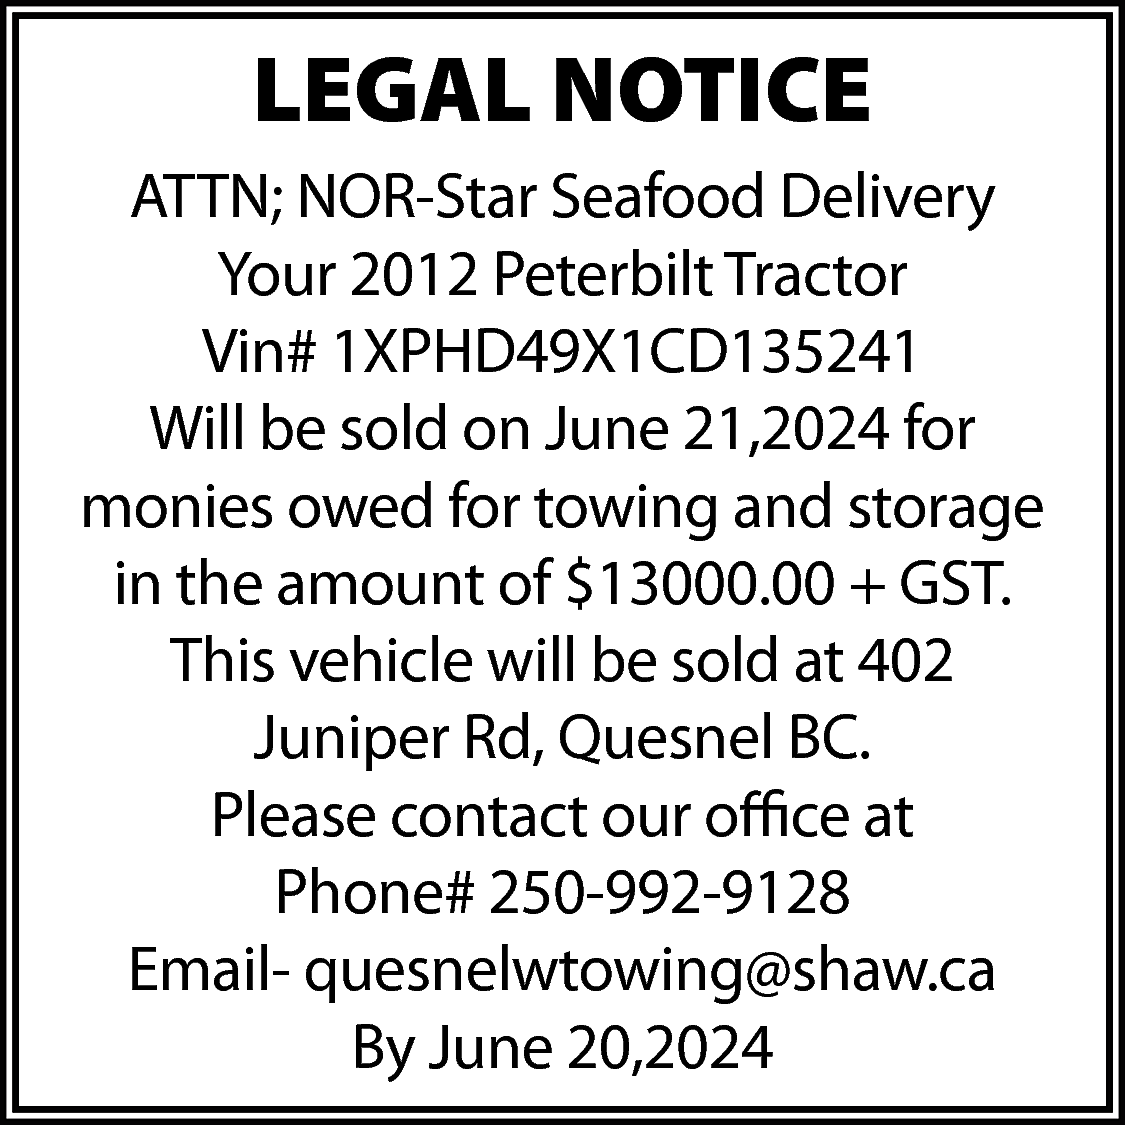 LEGAL NOTICE <br>ATTN; NOR-Star Seafood  LEGAL NOTICE  ATTN; NOR-Star Seafood Delivery  Your 2012 Peterbilt Tractor  Vin# 1XPHD49X1CD135241  Will be sold on June 21,2024 for  monies owed for towing and storage  in the amount of $13000.00 + GST.  This vehicle will be sold at 402  Juniper Rd, Quesnel BC.  Please contact our office at  Phone# 250-992-9128  Email- quesnelwtowing@shaw.ca  By June 20,2024    